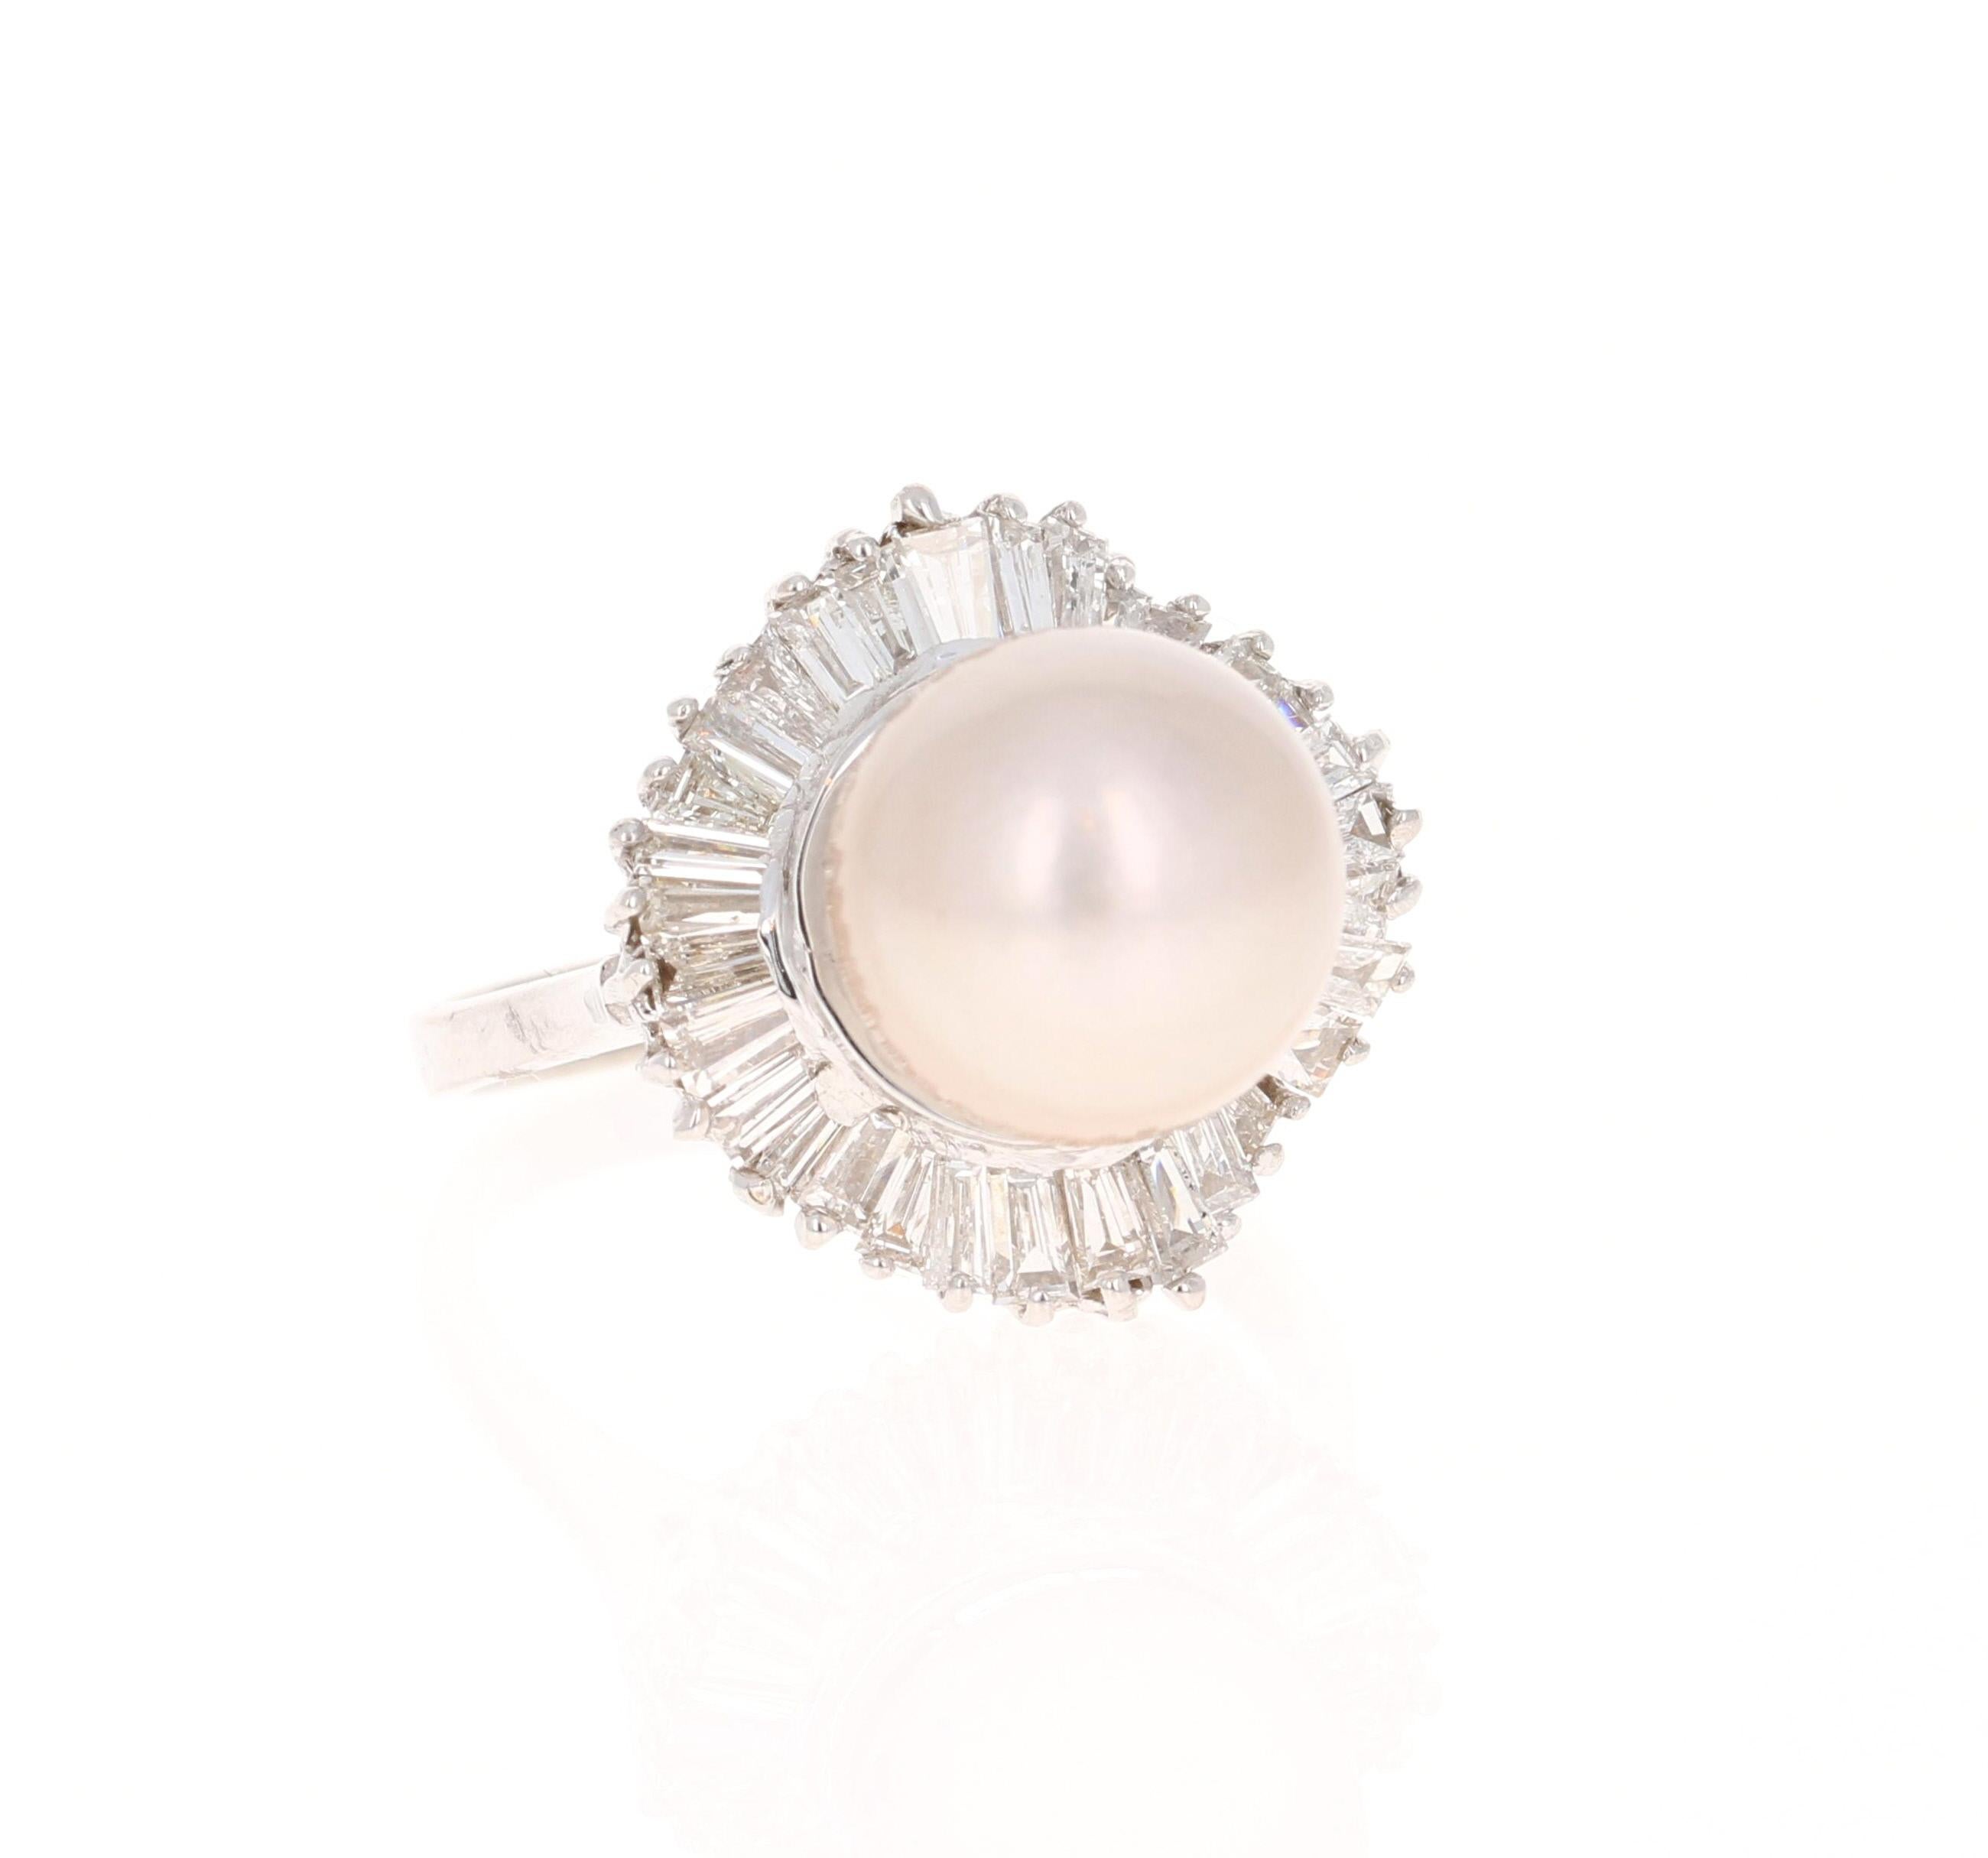 This beautiful ring has a stunning 10 mm South Sea Pearl that is set in the center of the ring.  The pearl is surrounded by a cluster of 34 Baguette Cut Diamonds that weigh 1.50 carats (Clarity: VS and Color: H) 
The ring is made in 14K White Gold